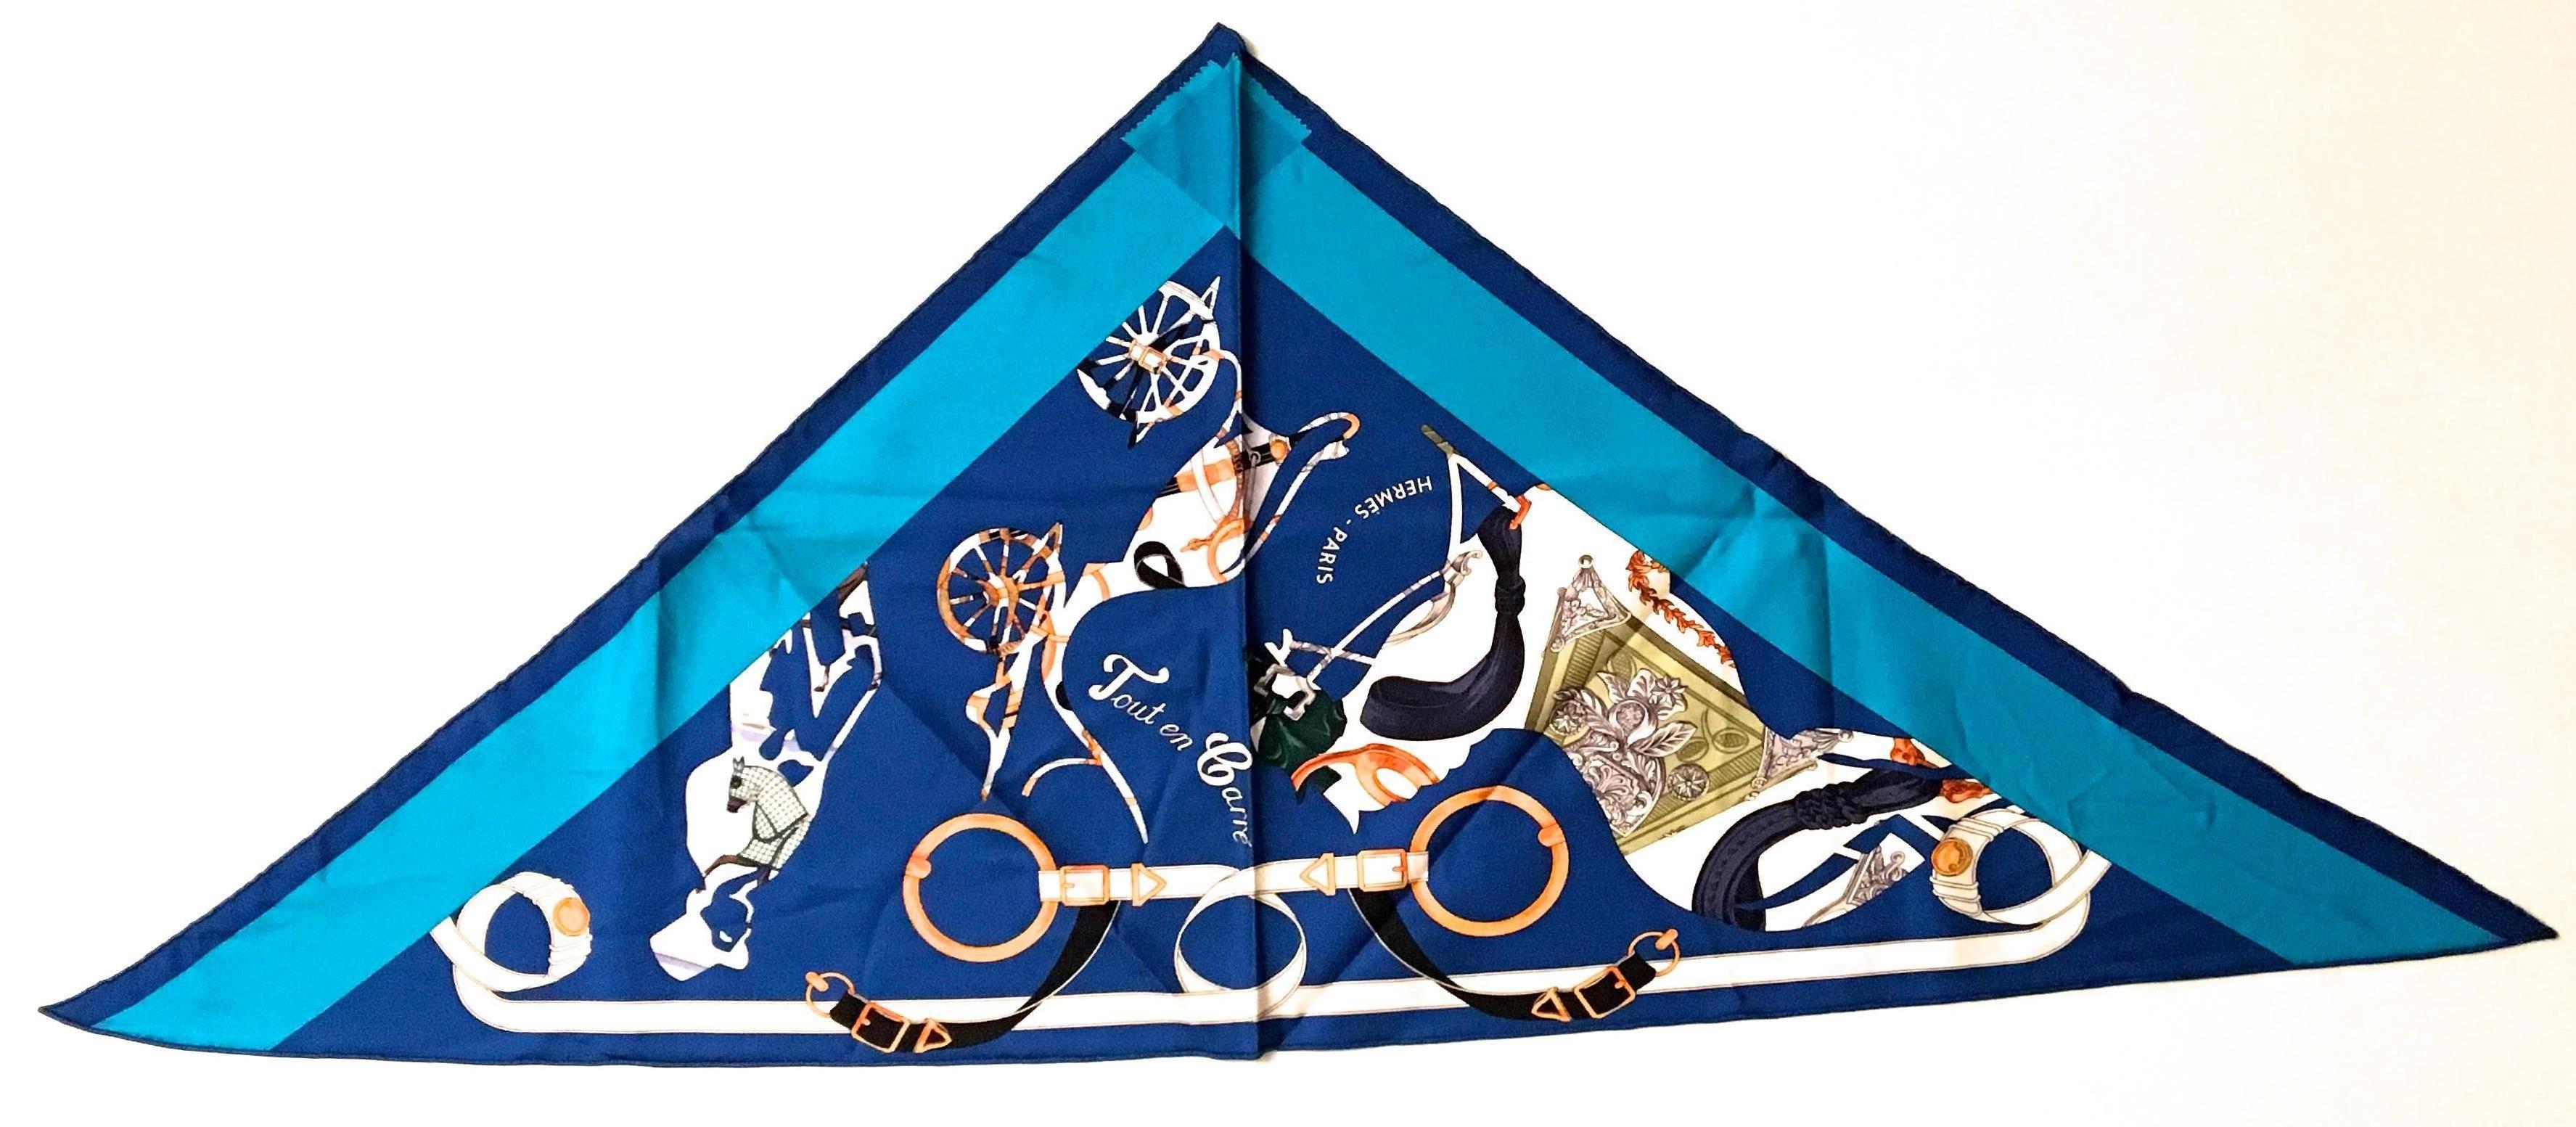 Presented here is an extremely rare scarf from Hermes Paris. This beautiful scarf is made from 100% silk and is hand rolled. The scarf is in a rare triangle shape. The design is comprised primarily of shades of blue with splashes of silver, gold and